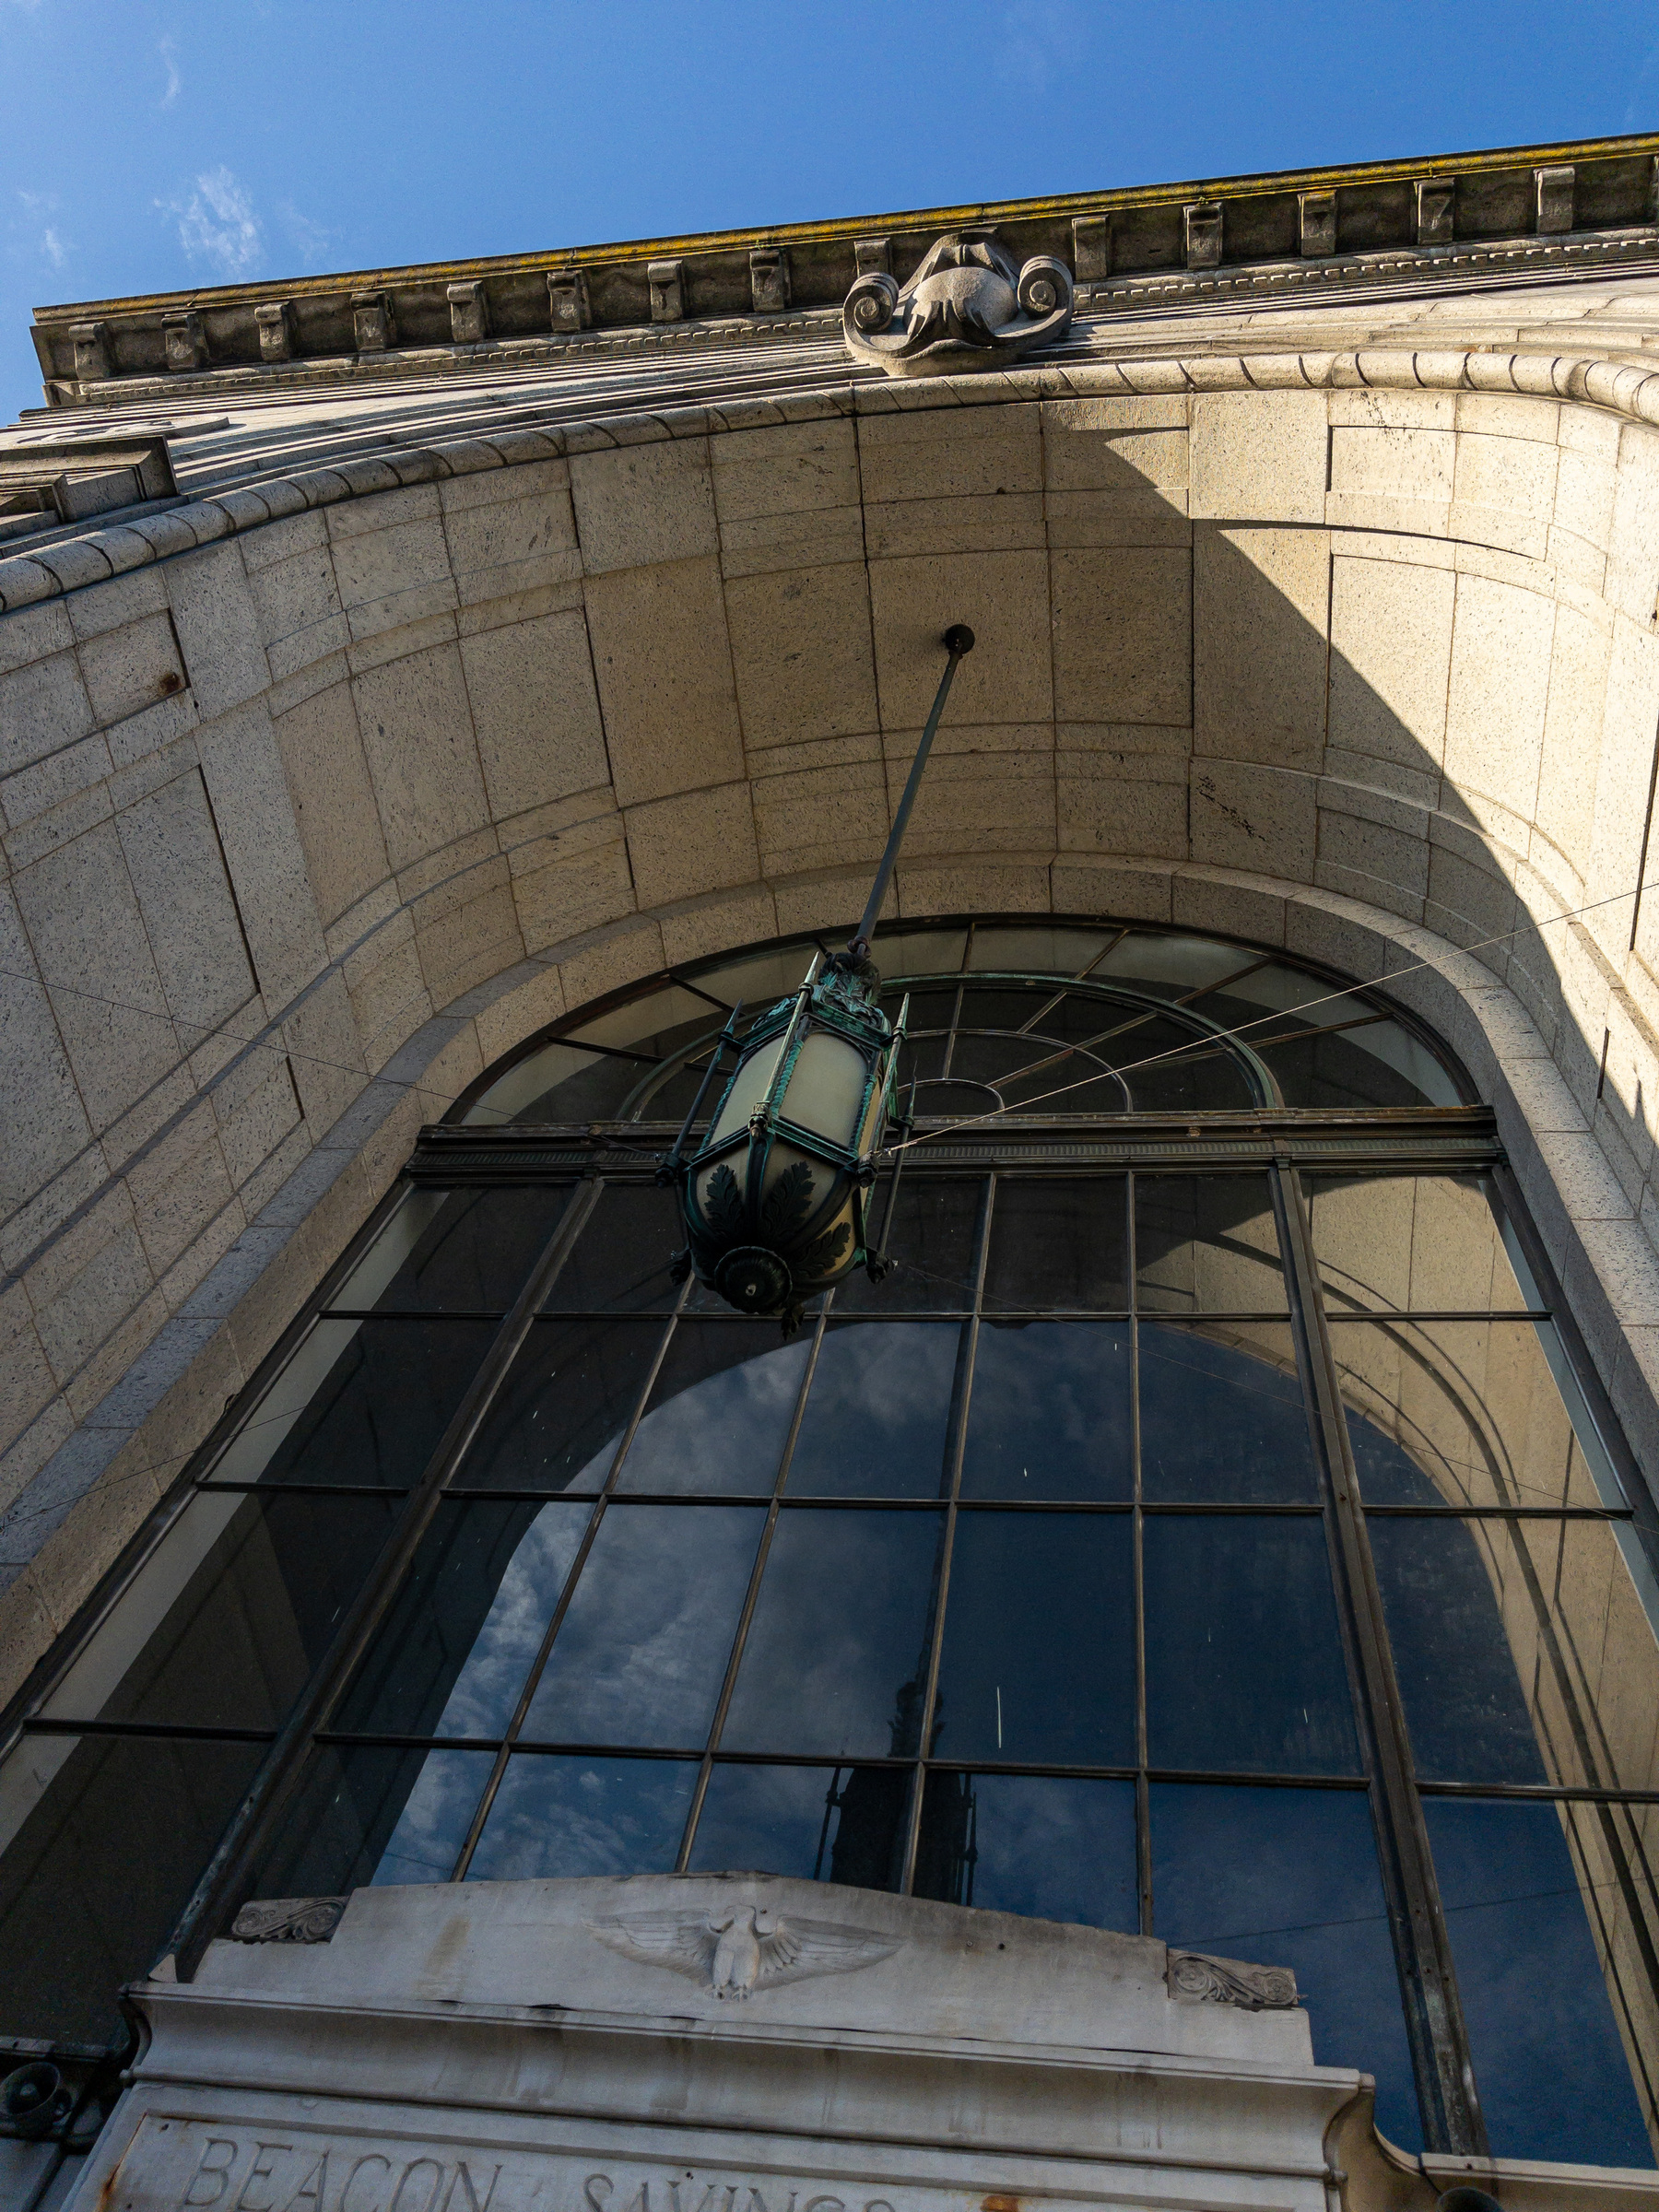 The arched recess and window of an old bank building from below looking up towards the sky.